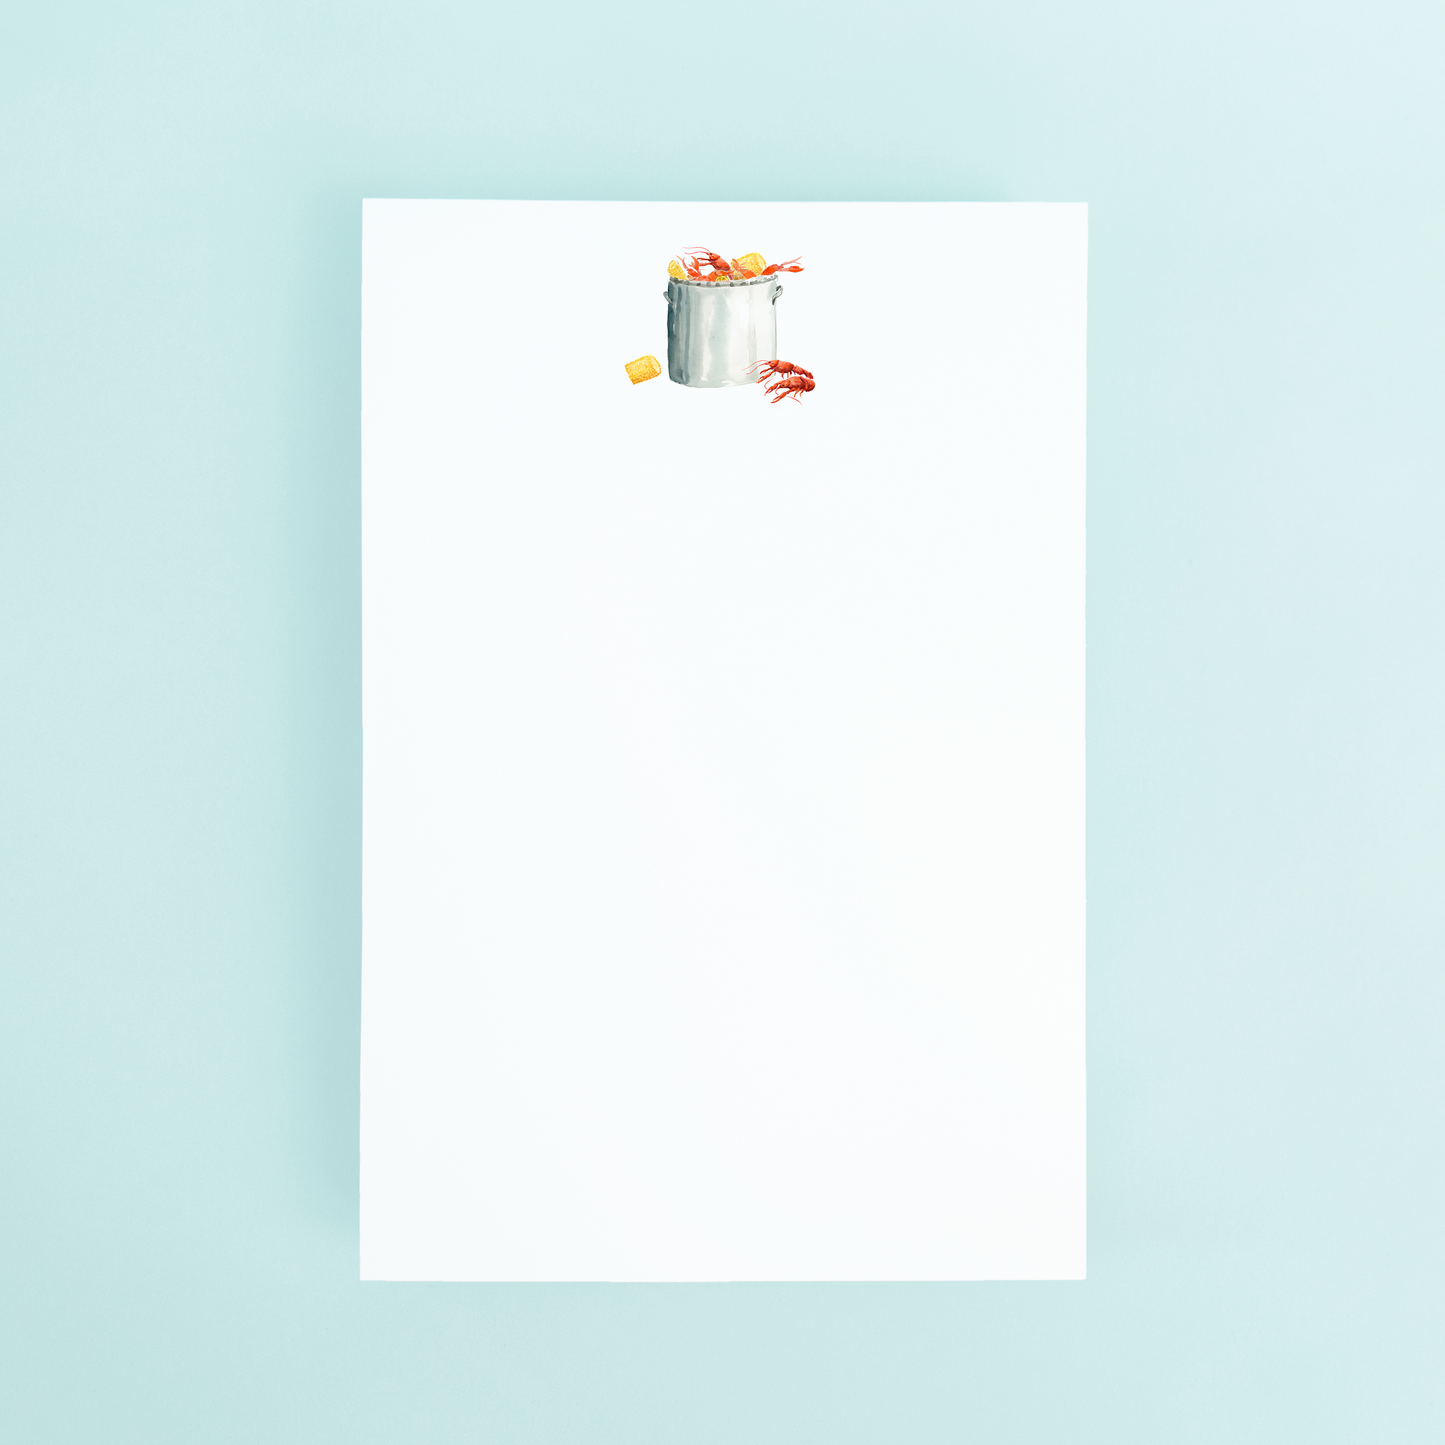 crawfish boil notepad. what do you need for a crawfish boil?